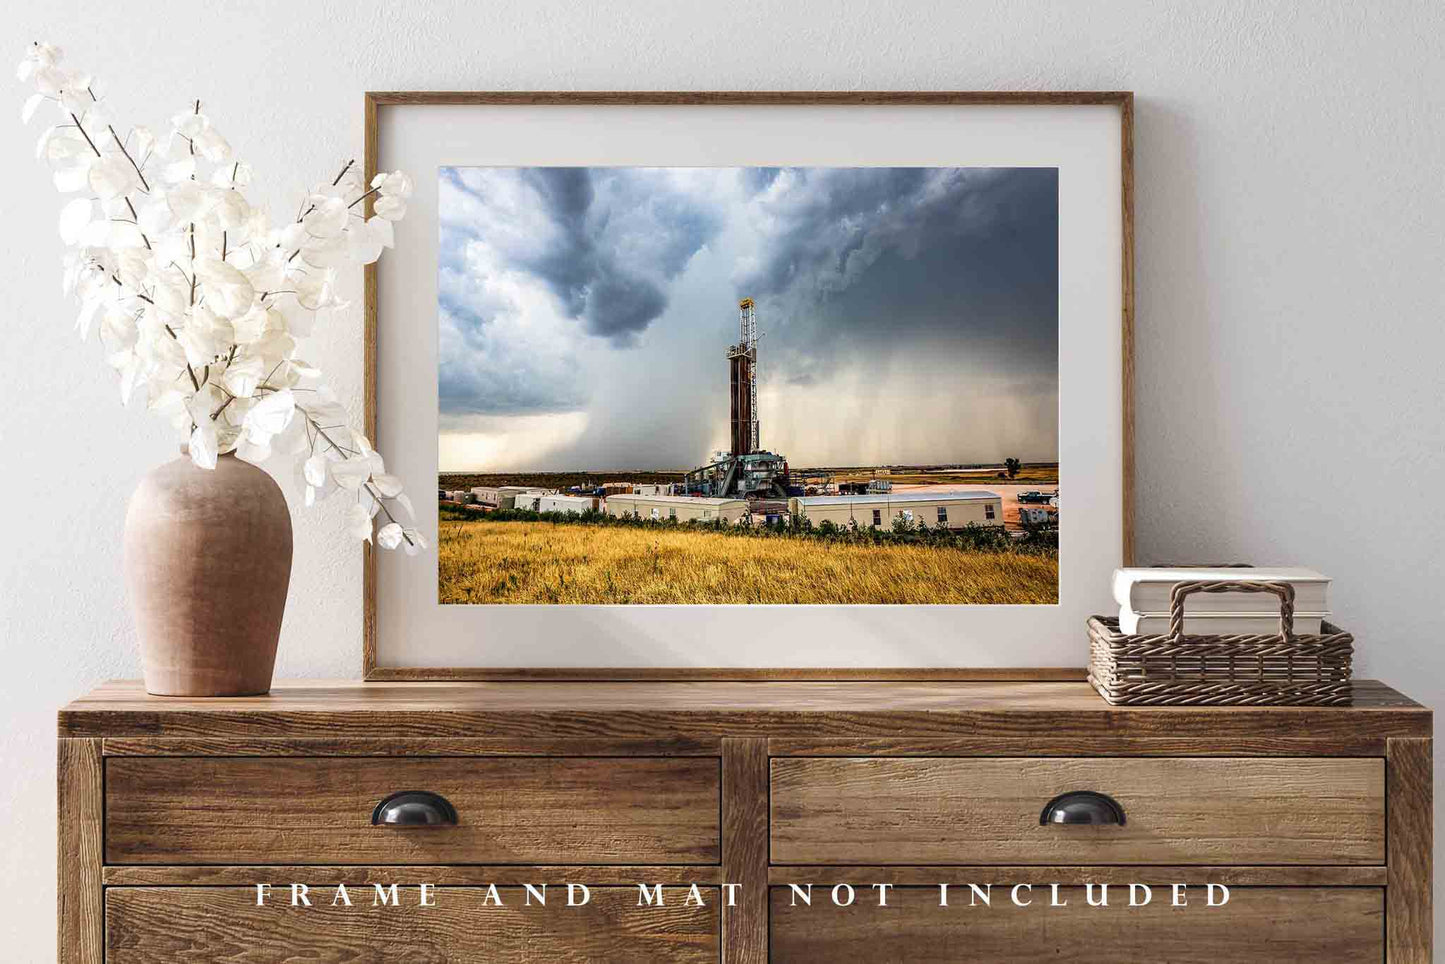 Drilling Rig Photography Print | Storm Picture | Oil and Gas Wall Art | Oklahoma Photo | Oilfield Decor | Not Framed